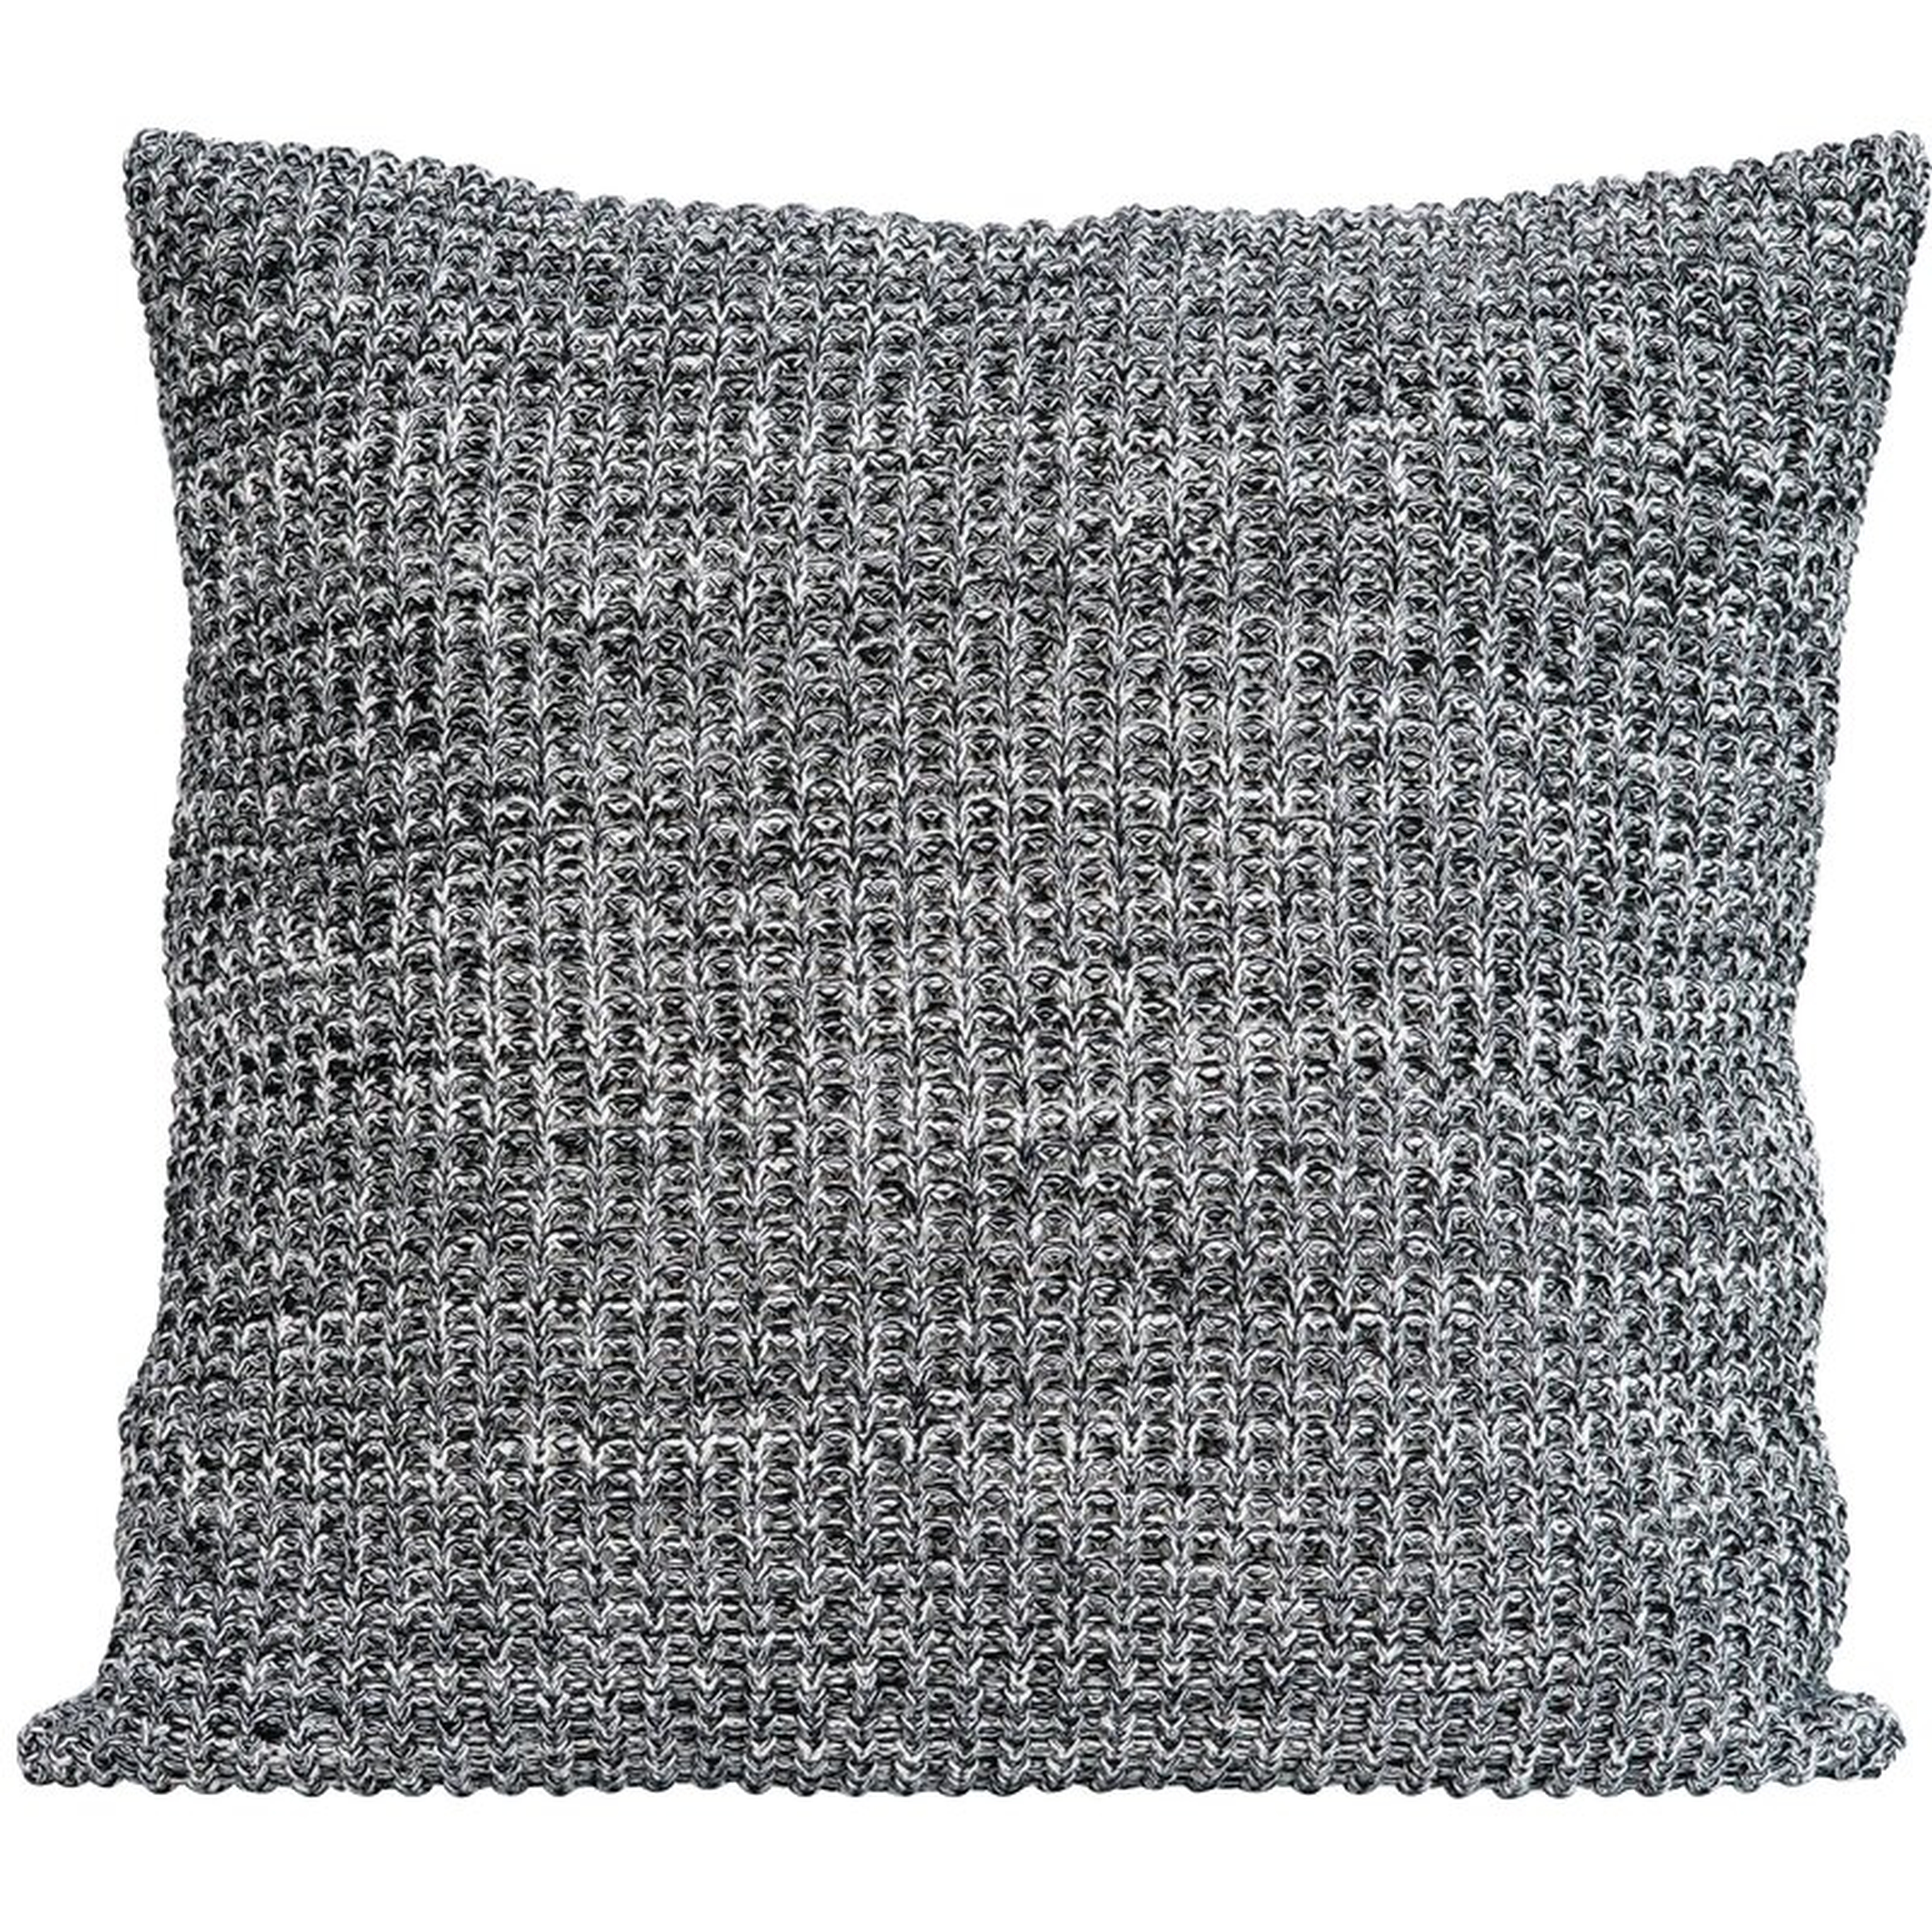 Bloomingville Black & Natural Square Cotton Knit Pillow with Leather Handle - Perigold